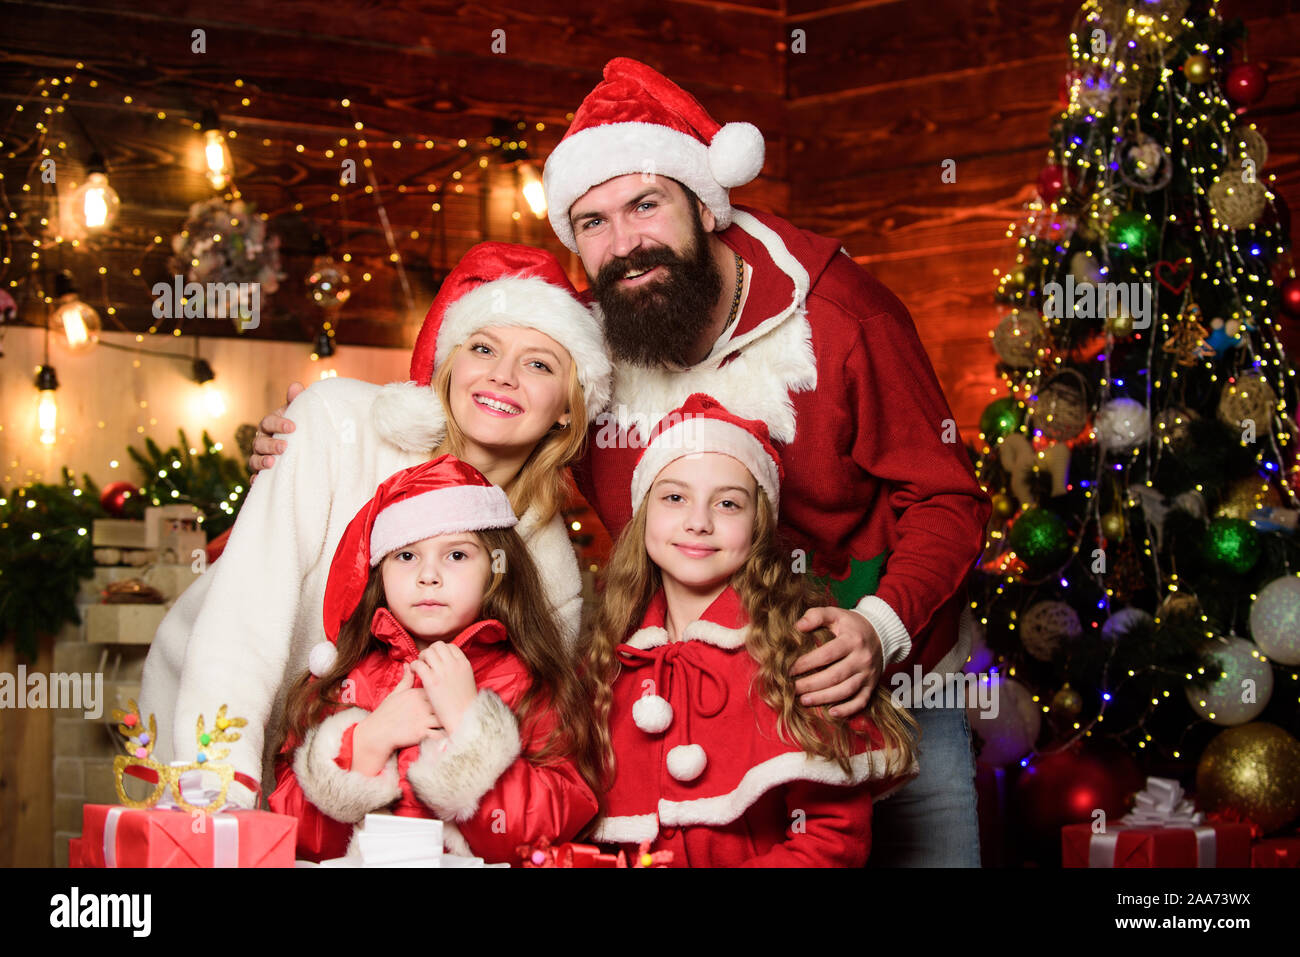 https://c8.alamy.com/comp/2AA73WX/capturing-a-happy-moment-happy-family-celebrate-new-year-portrait-loving-family-lot-of-xmas-present-boxes-merry-christmas-father-and-mother-love-kids-small-children-and-parents-in-santa-hat-2AA73WX.jpg